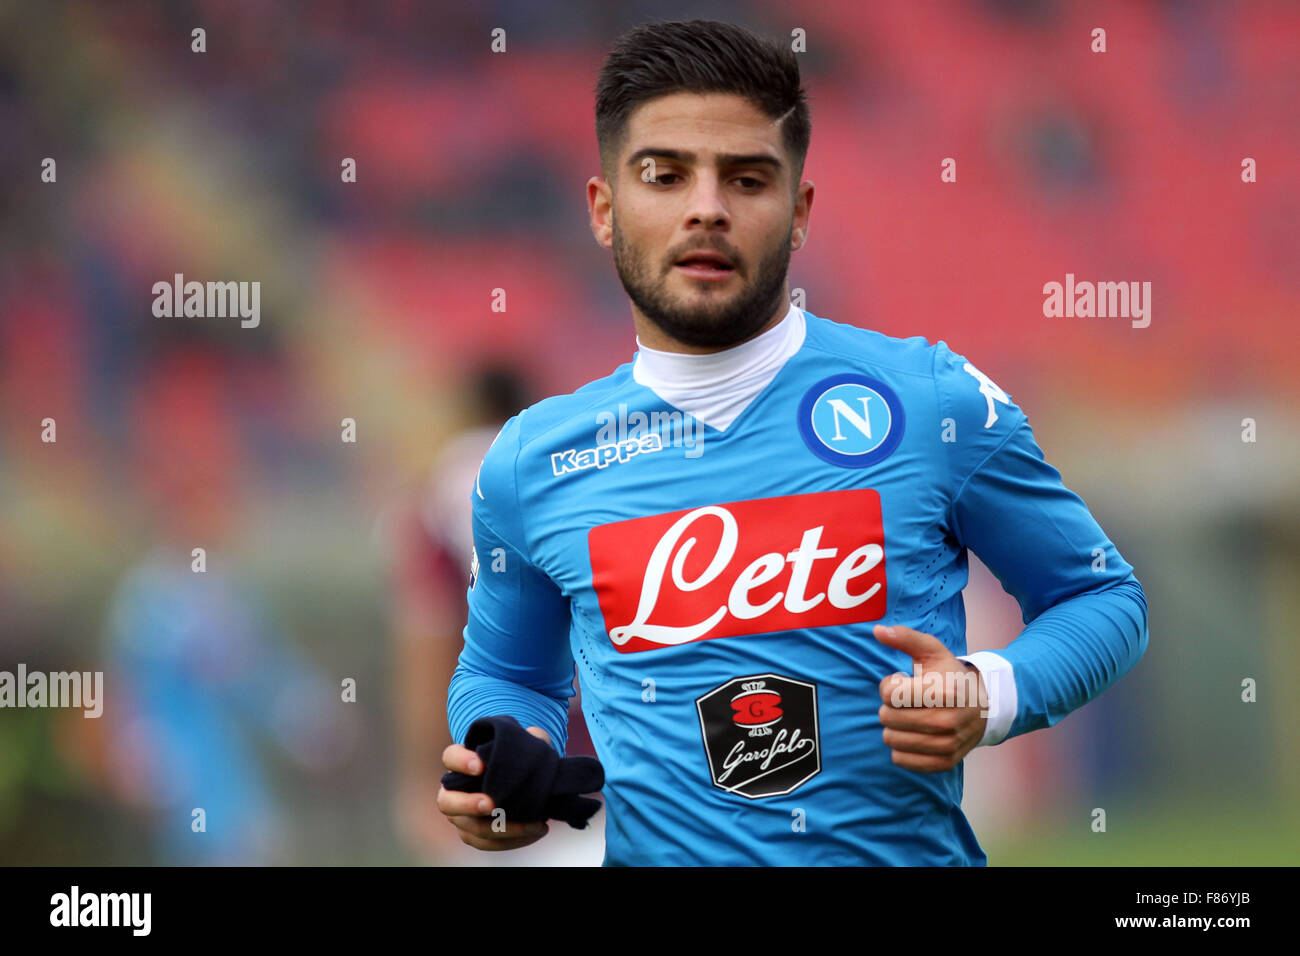 Bologna, Italy. 06th Dec, 2015. Napoli's forward Lorenzo Insigne during the  Italian Serie A football match between Bologna FC v SSC Napoli on 6th  December, 2015 at Dall'Ara Stadium. Credit: Andrea Spinelli/Alamy